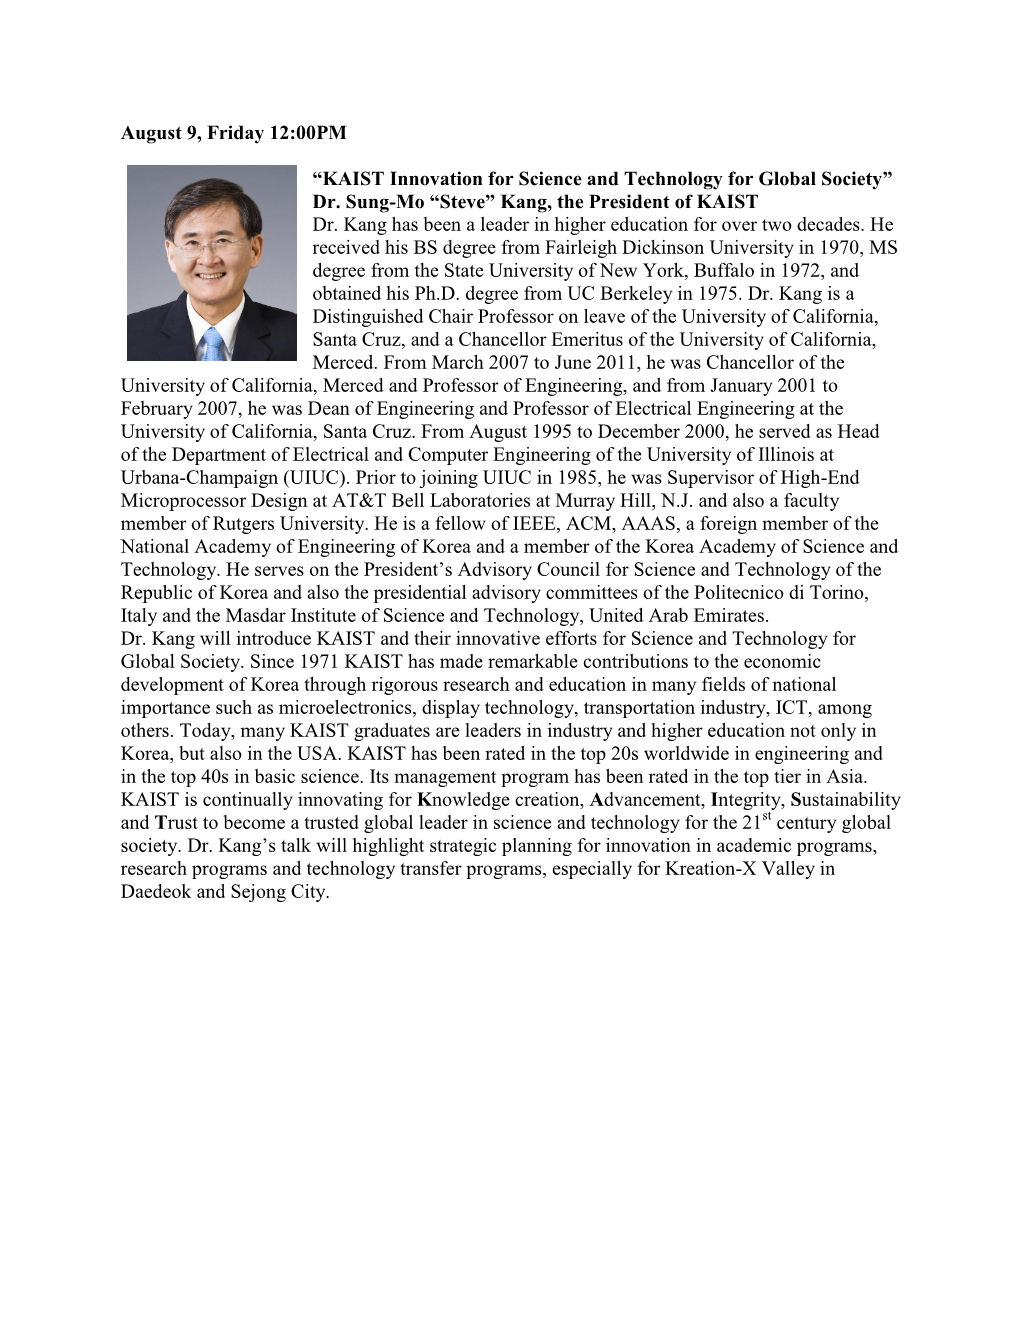 August 9, Friday 12:00PM “KAIST Innovation for Science and Technology for Global Society” Dr. Sung-Mo “Steve” Kang